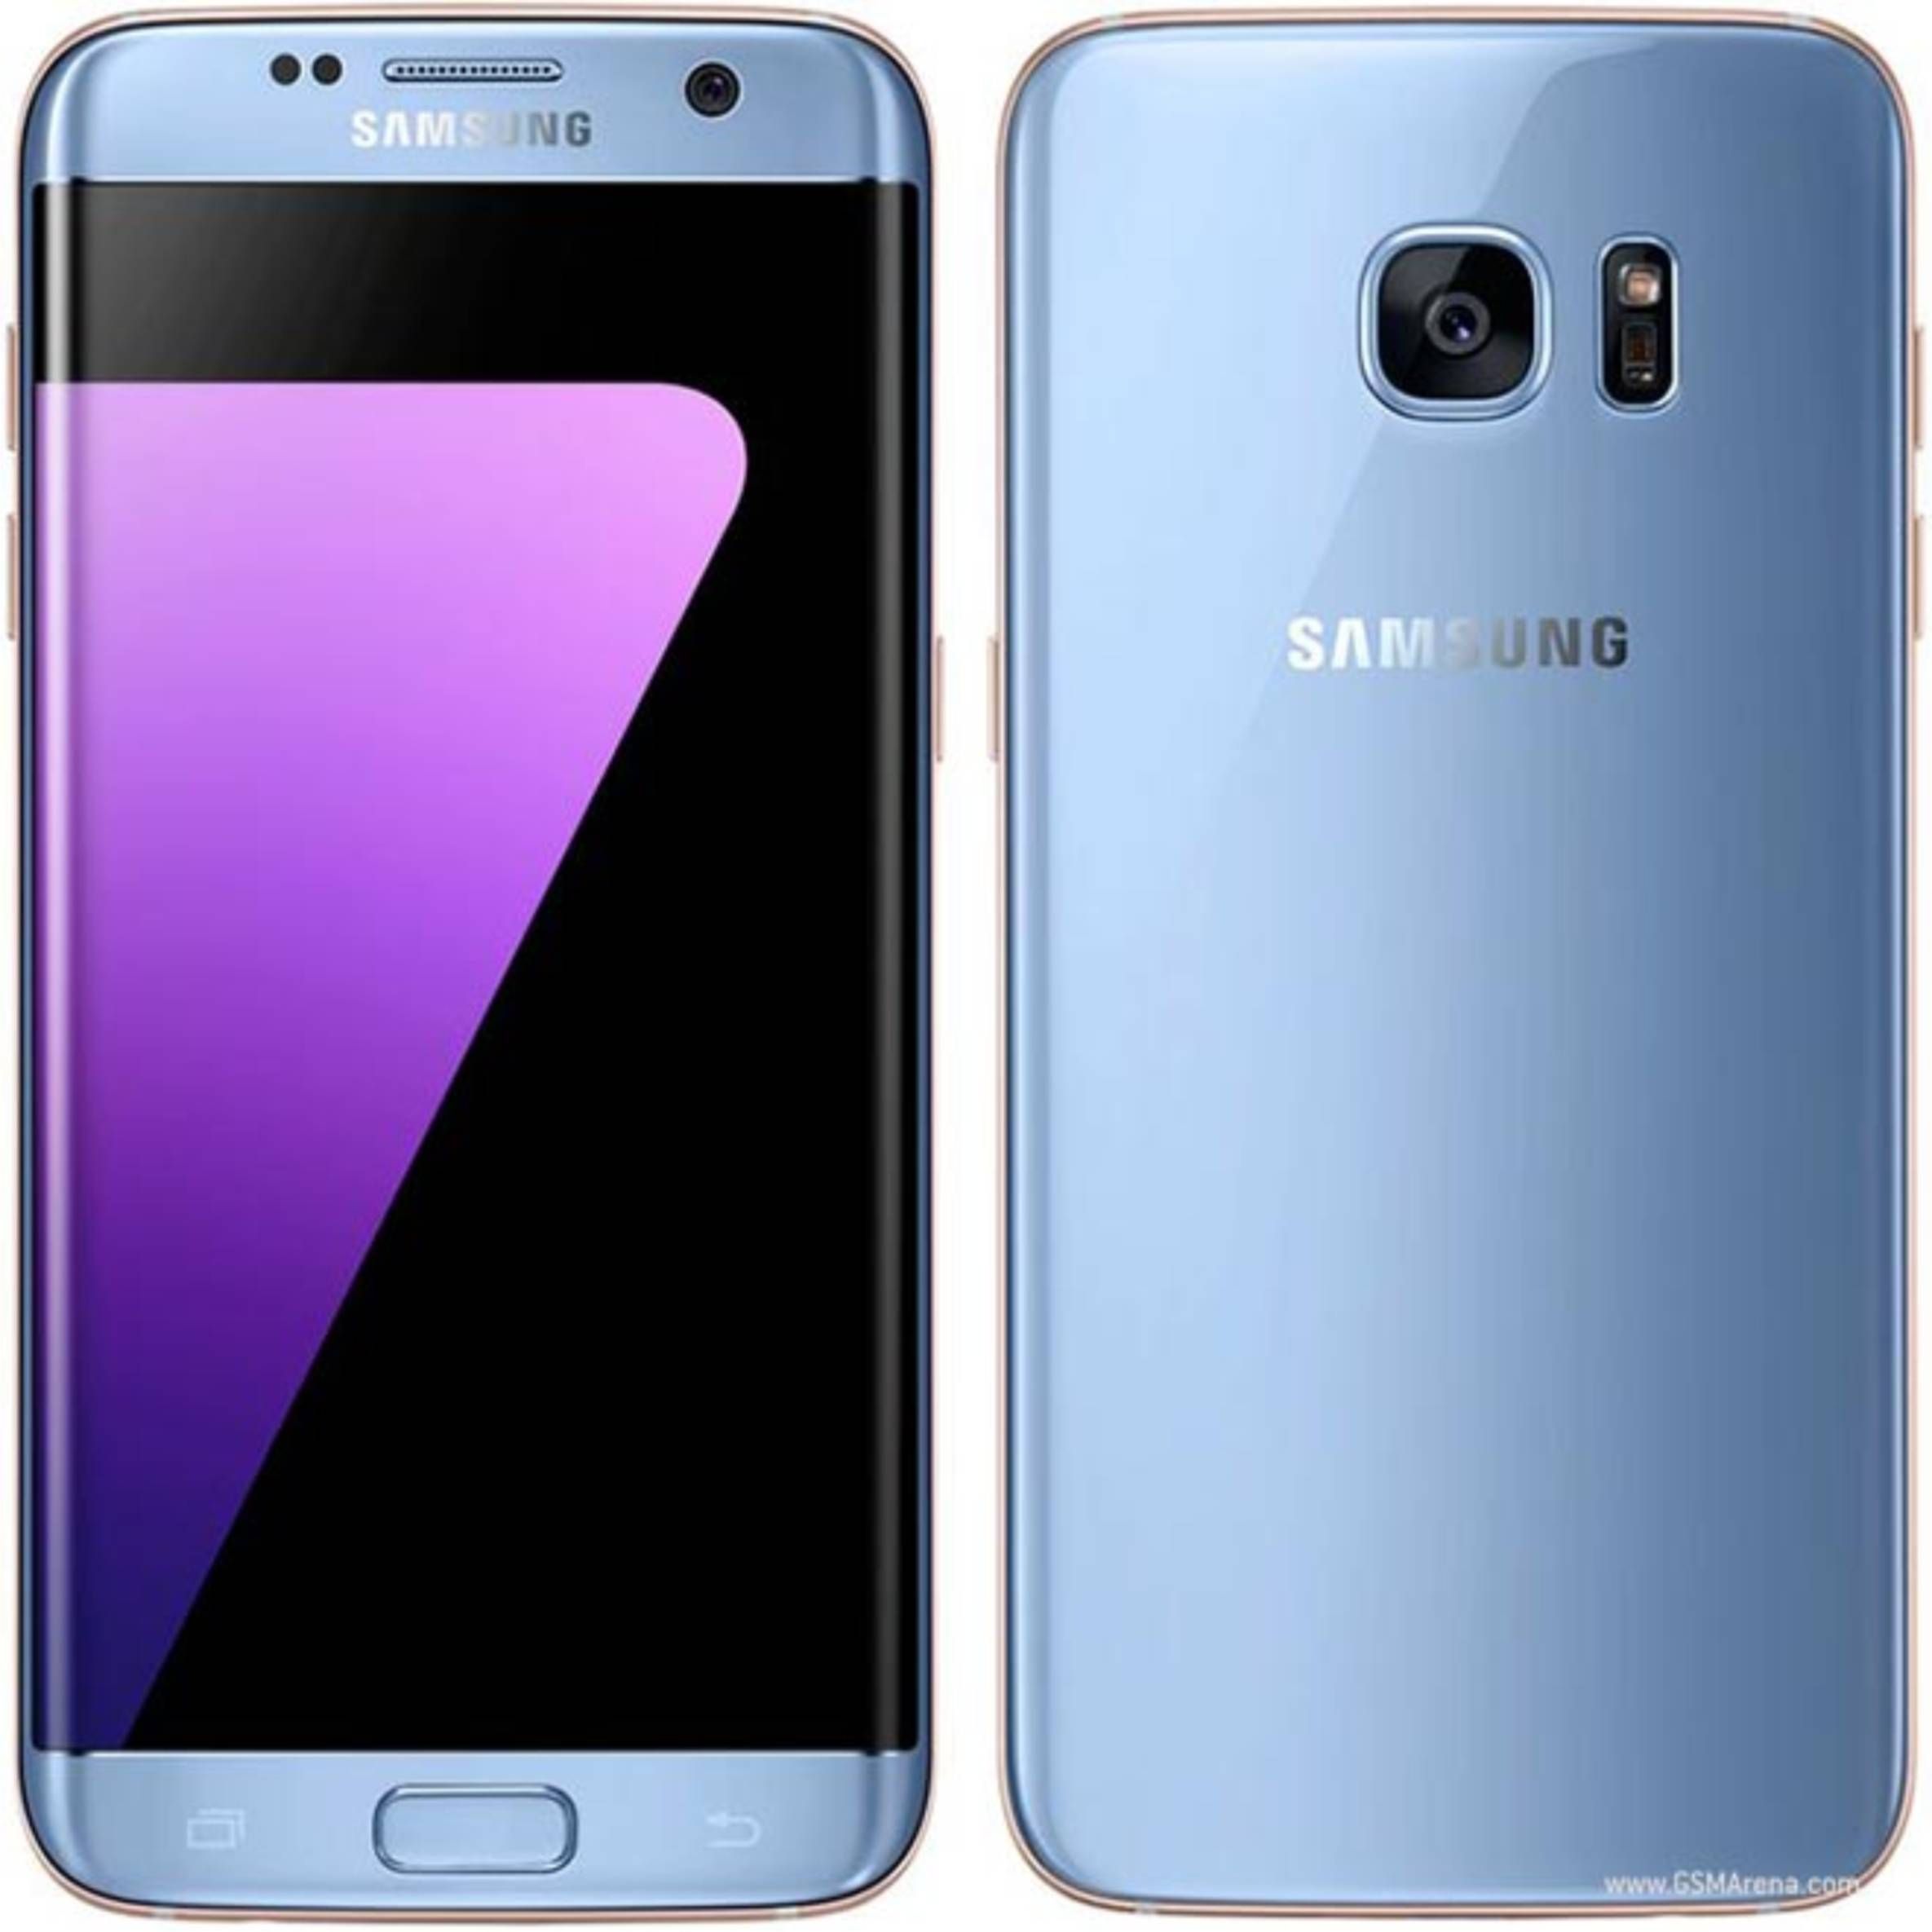 What is Samsung Galaxy S7 Edge Screen Replacement Cost in Kenya?